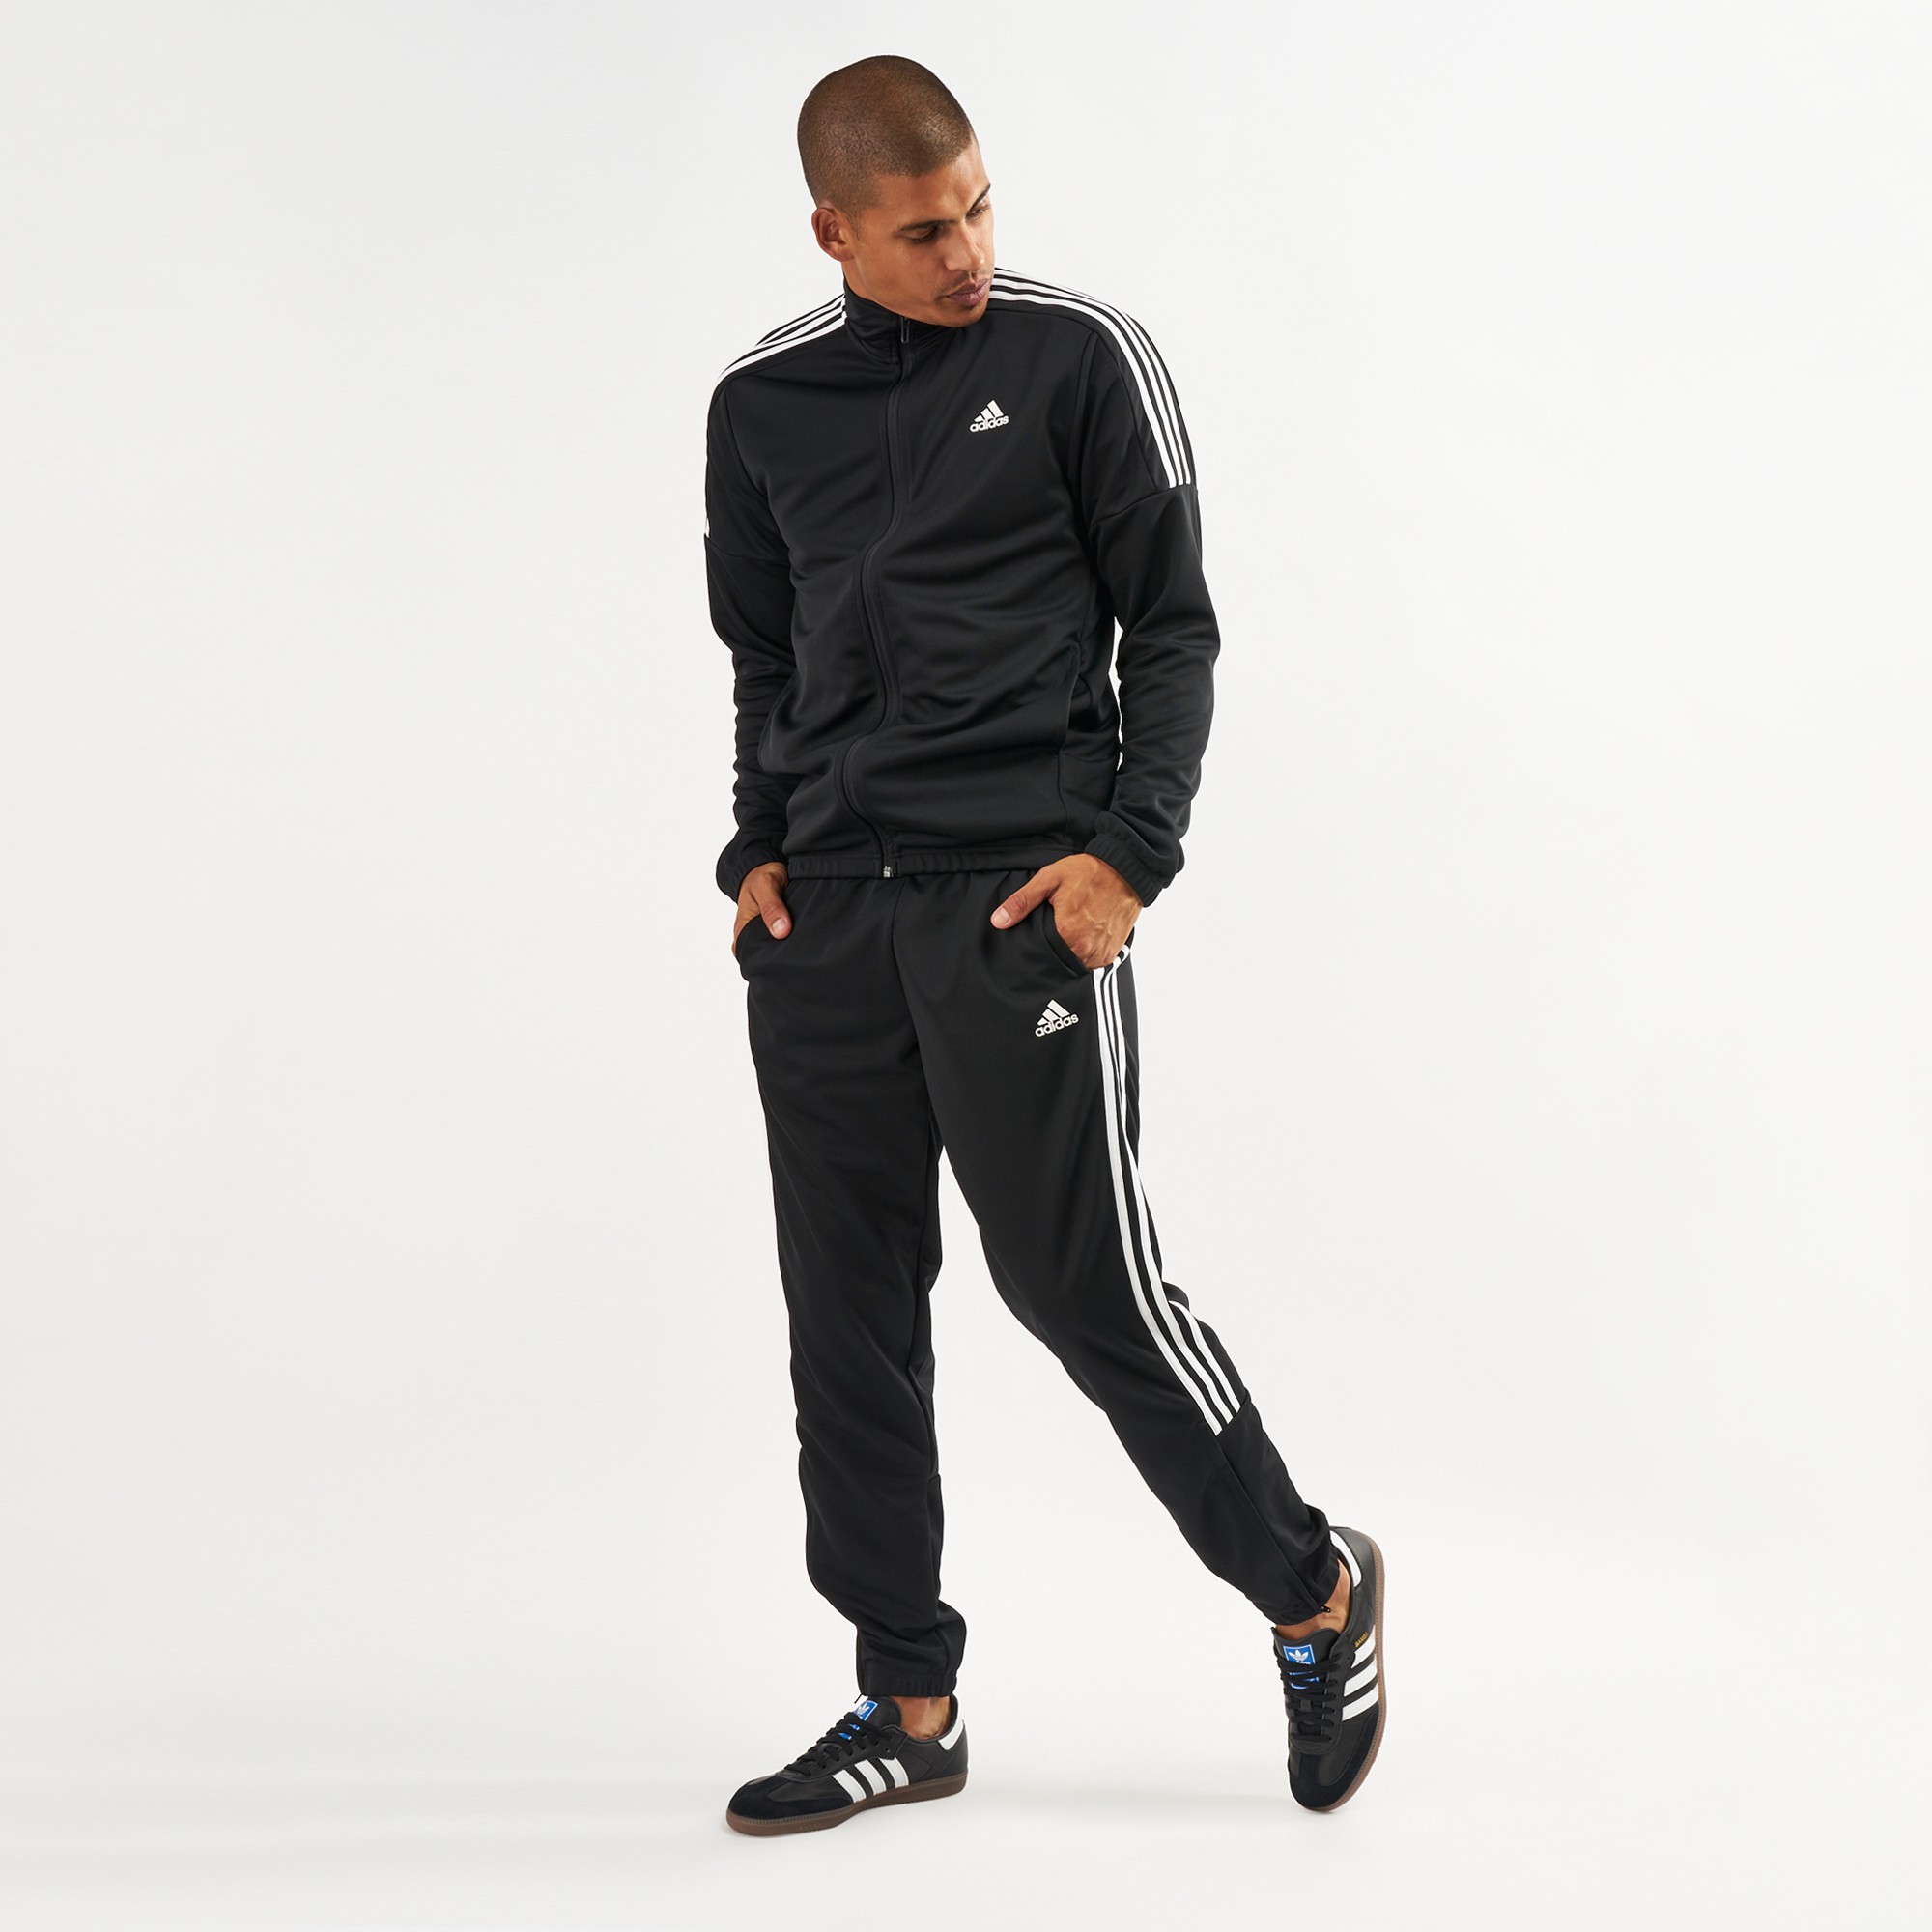 Adidas Men's Team Sports Track Suit | Tracksuits | Clothing | Mens | ADAP- DV2447 | SSS